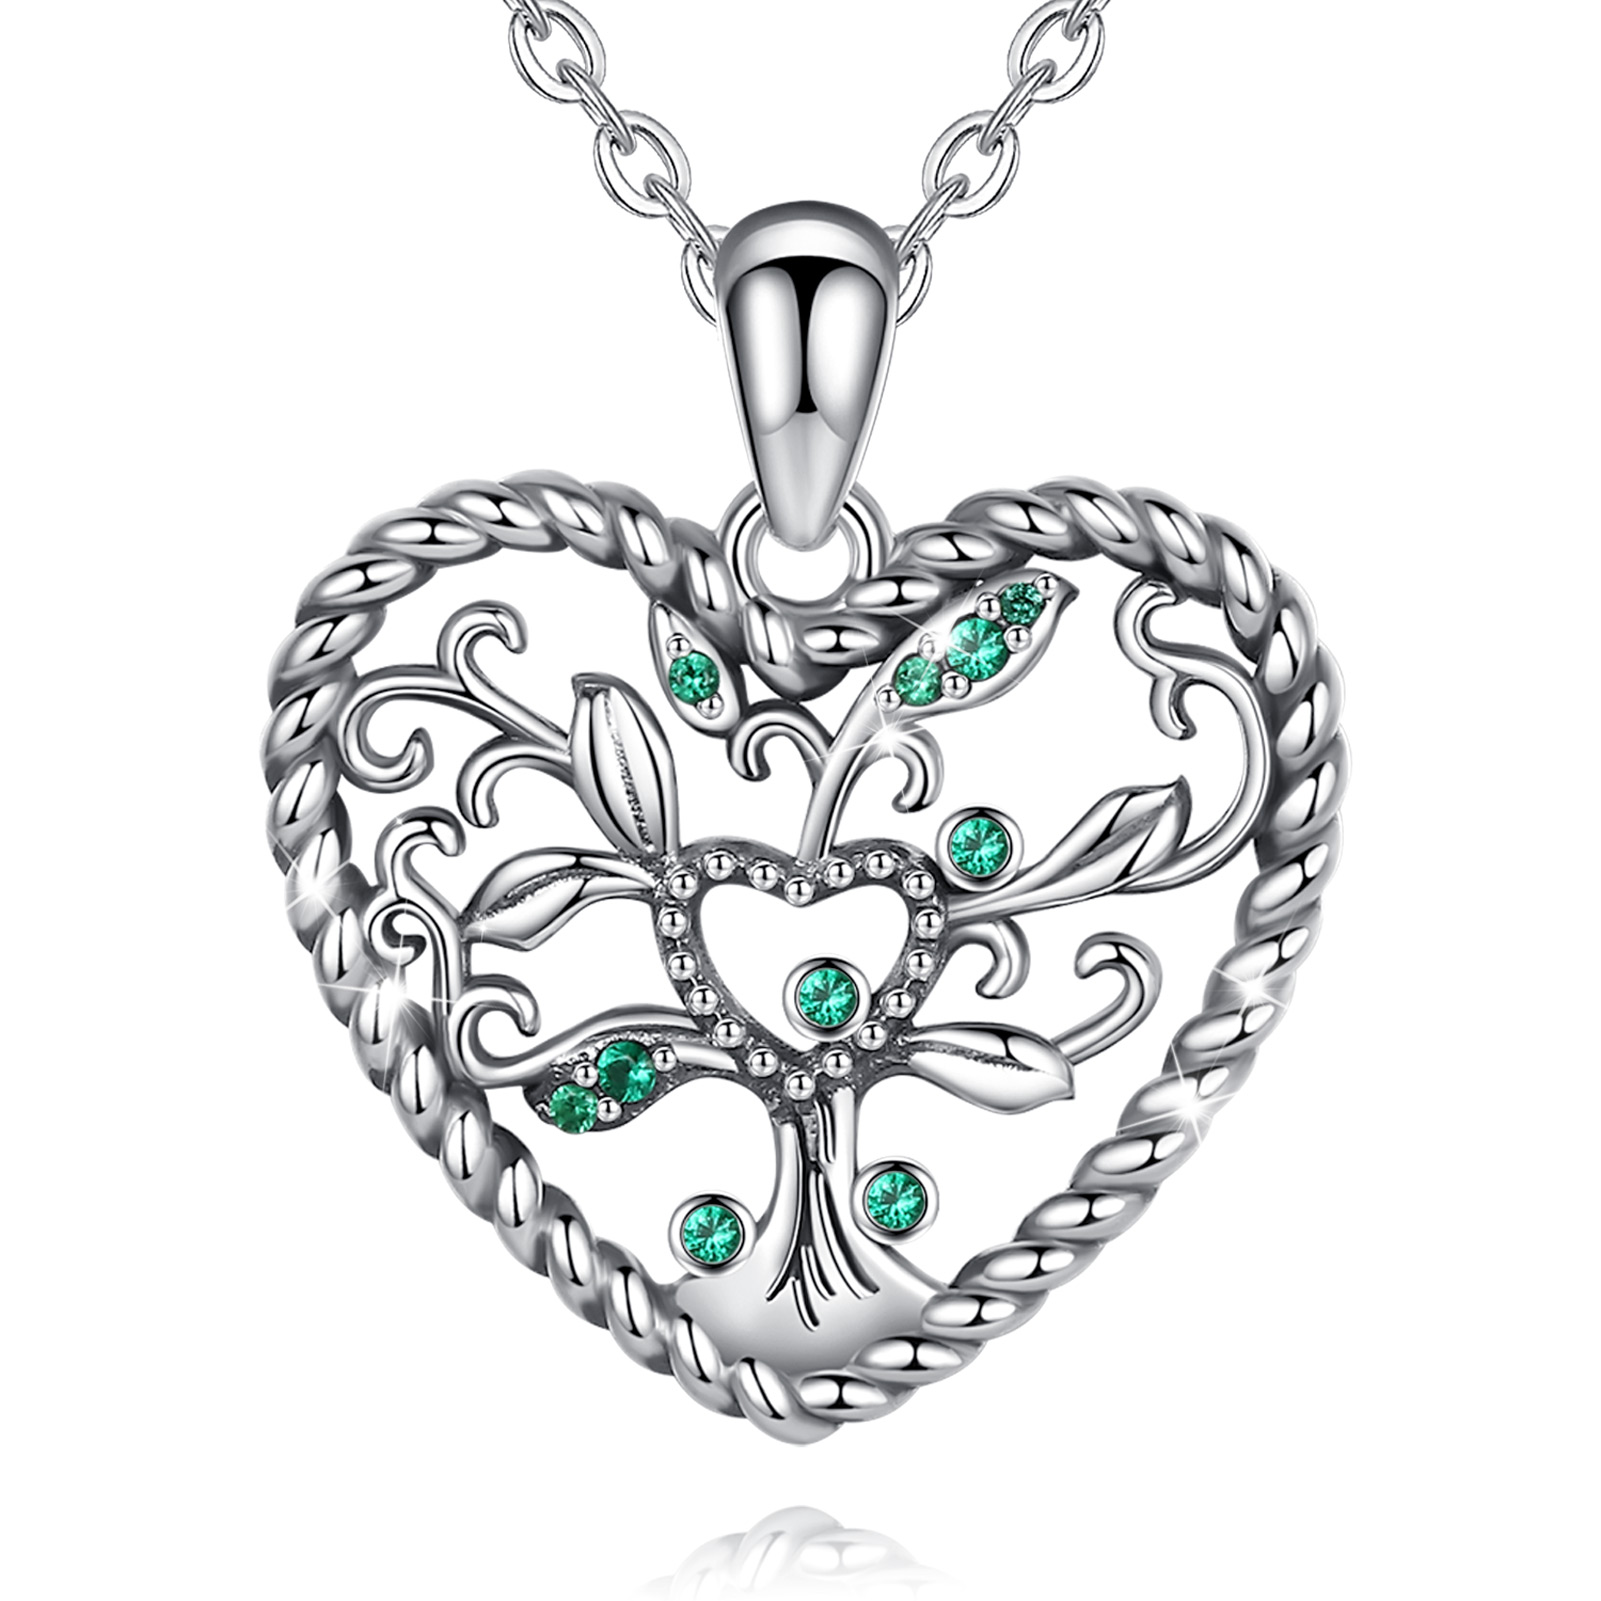 Merryshine Jewelry Dainty S925 Sterling Silver Tree of Life Pendant Necklace with Green Cubic Zirconia